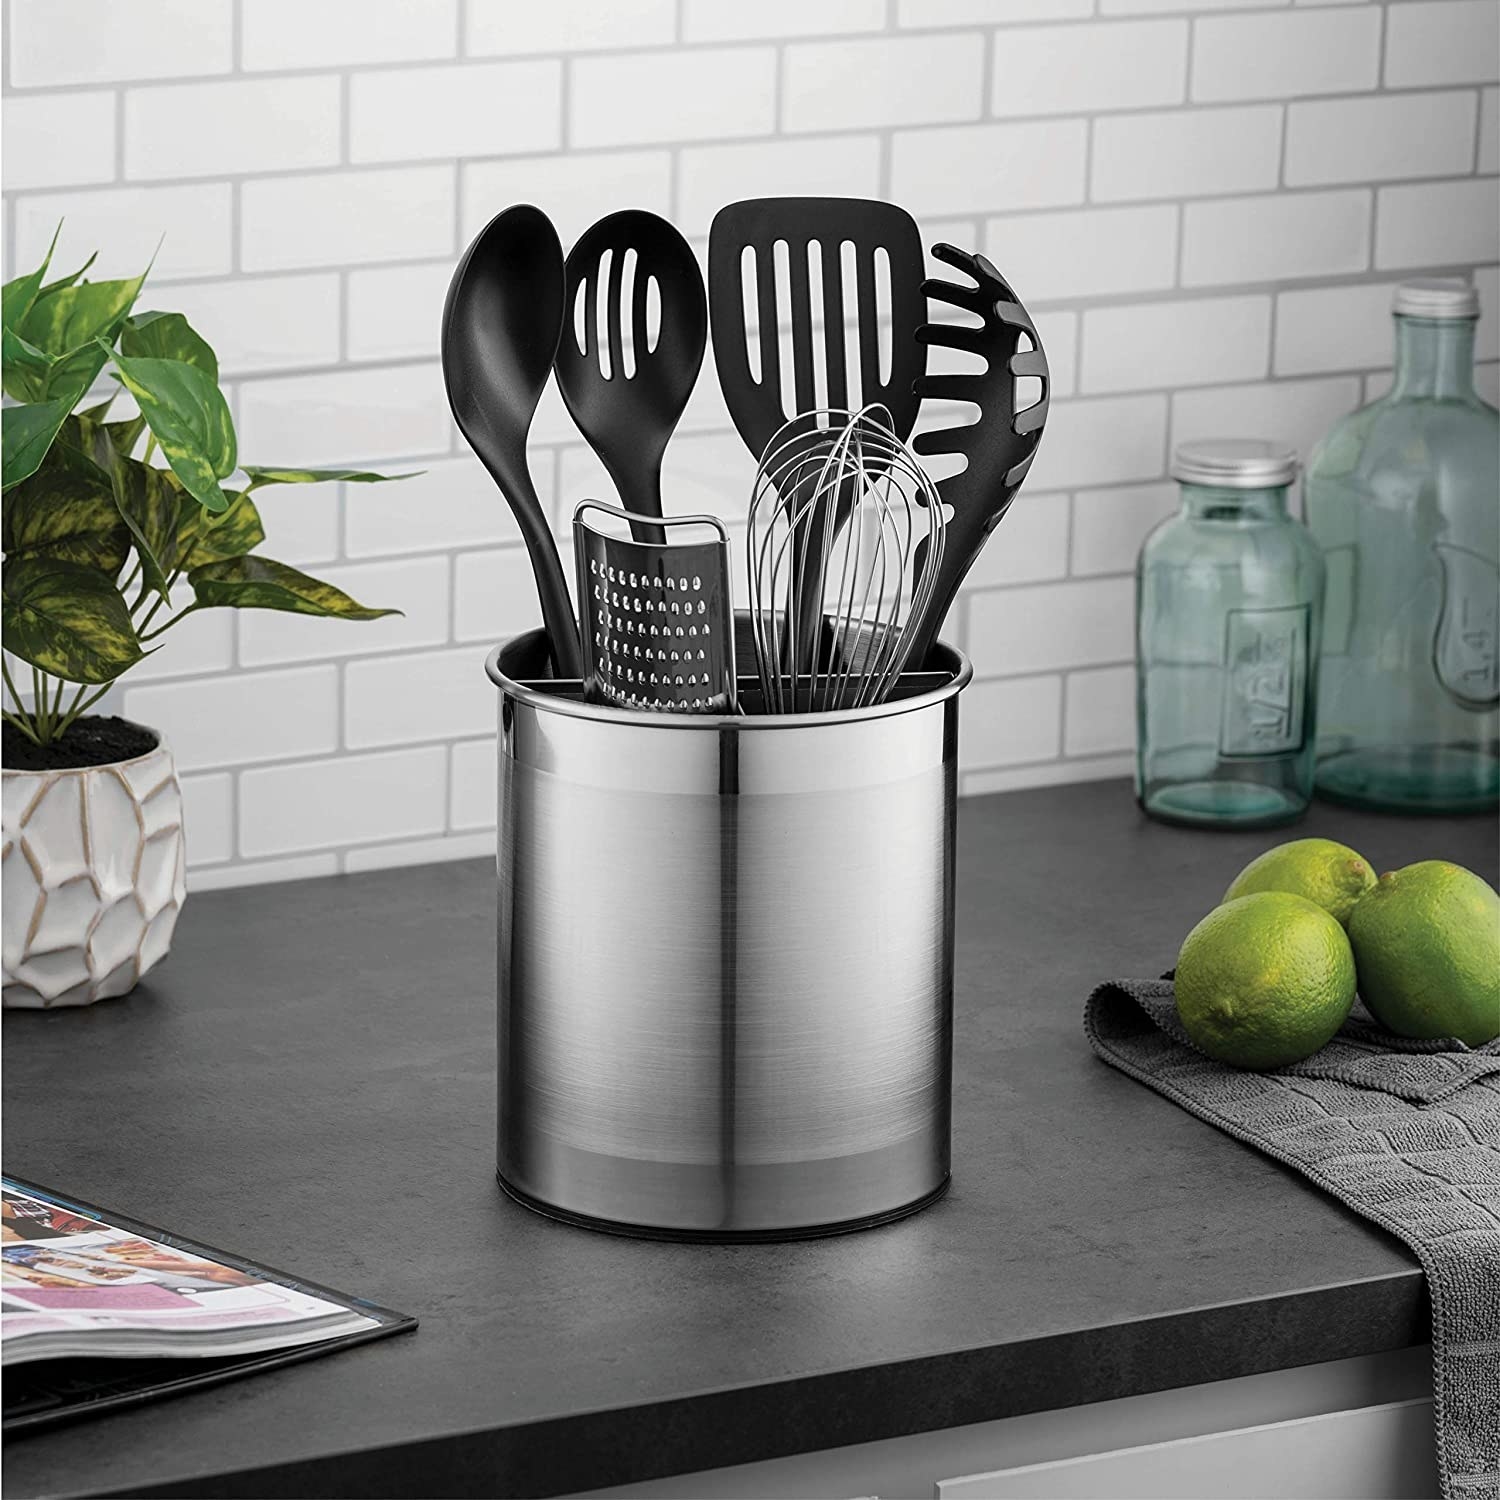 A large metal utensil holder filled with kitchen tools sitting in it